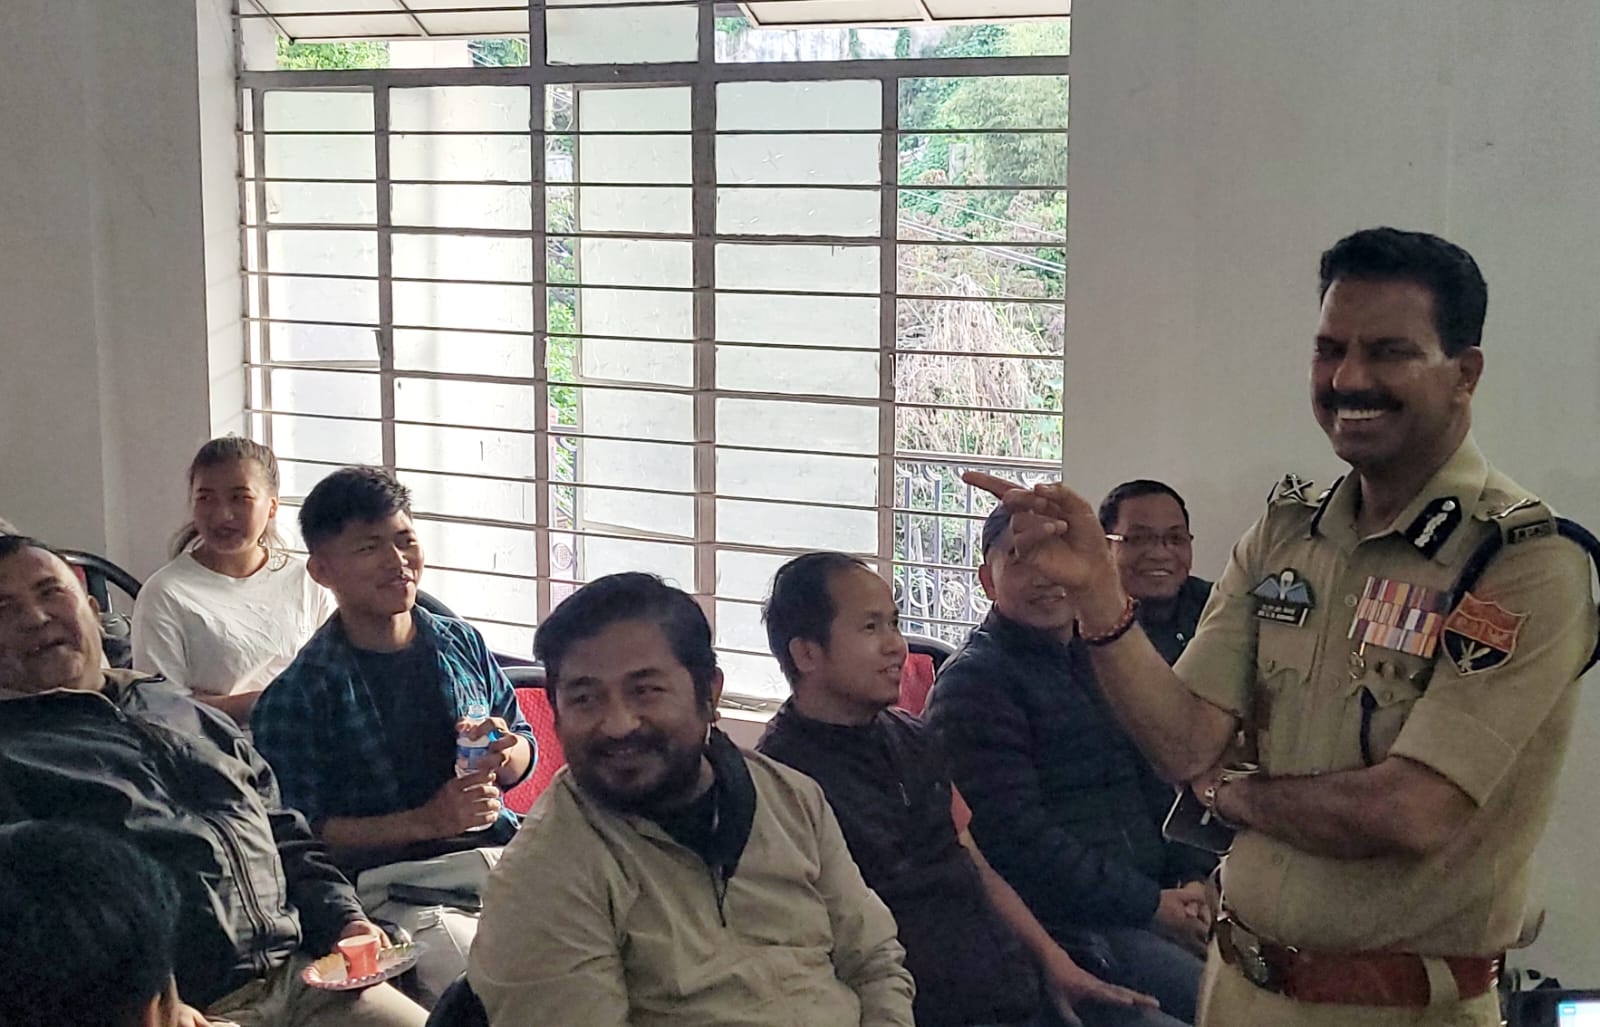 Meghalaya police organises peace meeting with Kukis and Meiteis in Shillong